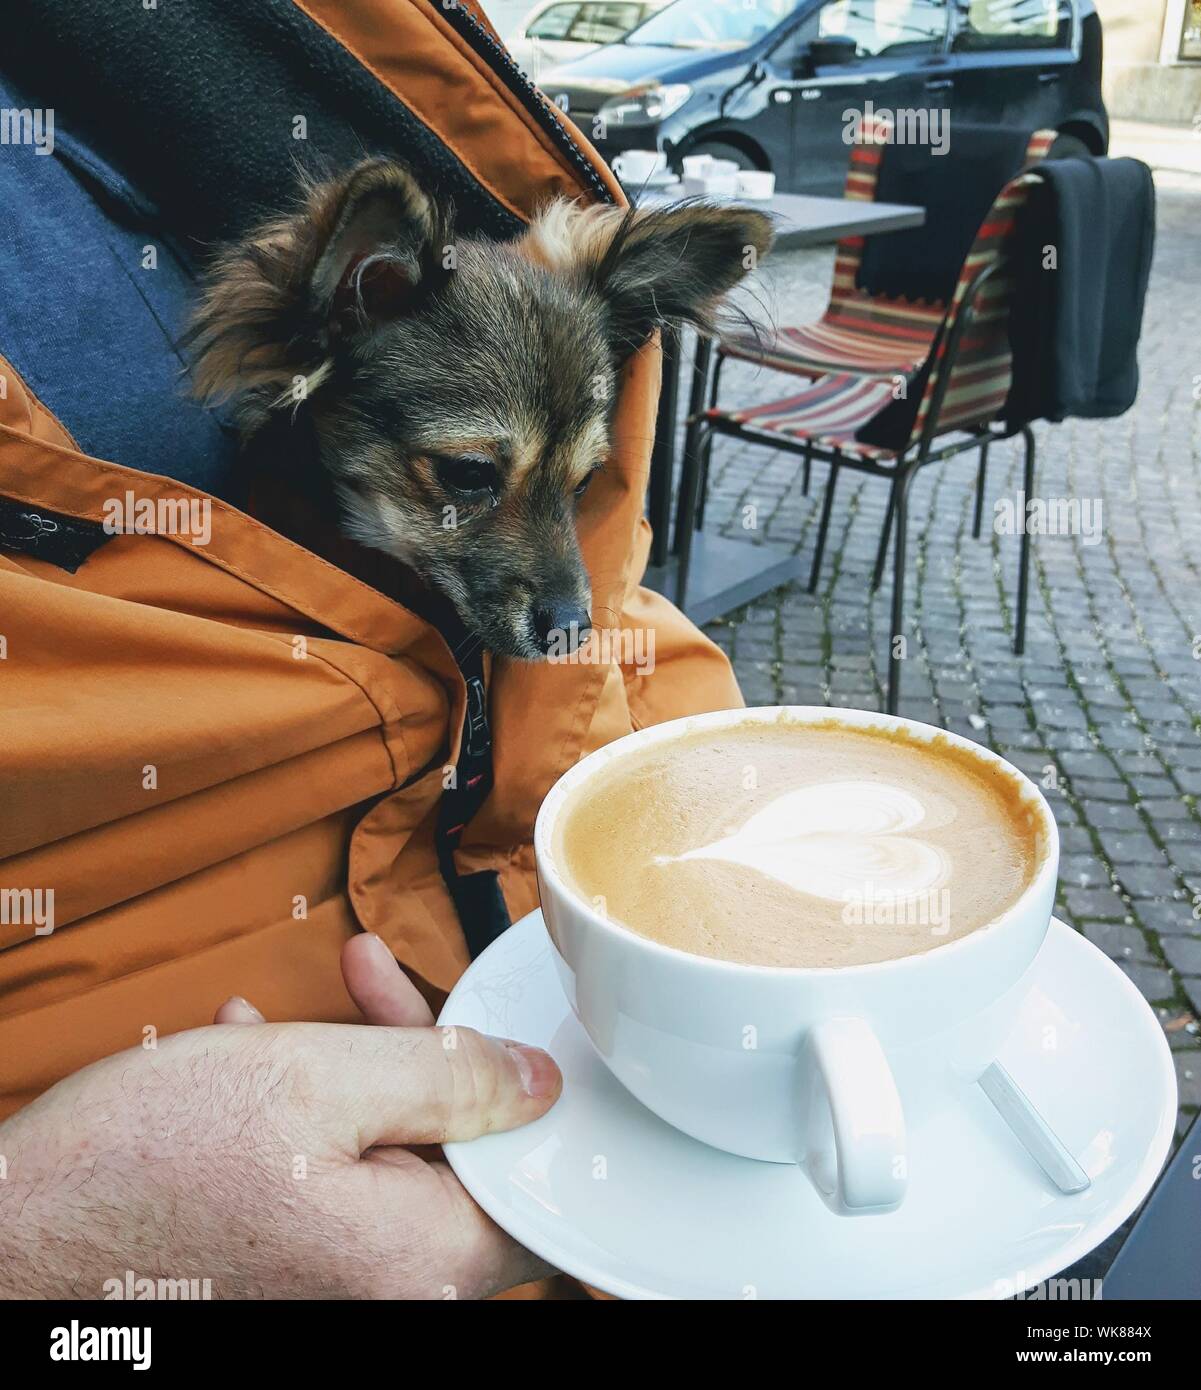 a dog that looks like a capuccino